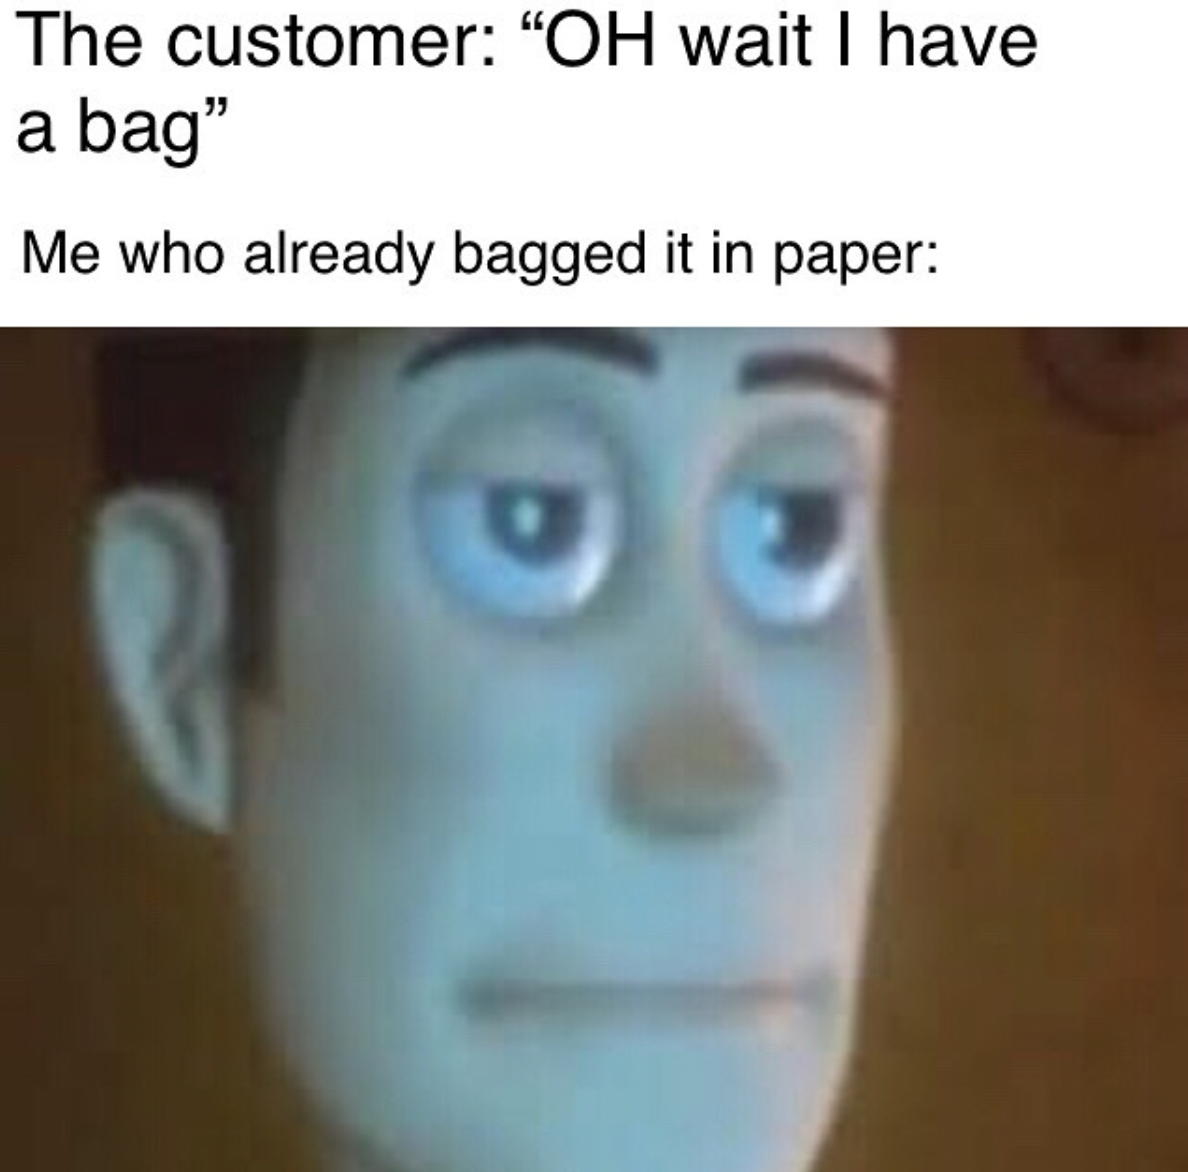 Meme about a customer saying they have a bag after things are bagged